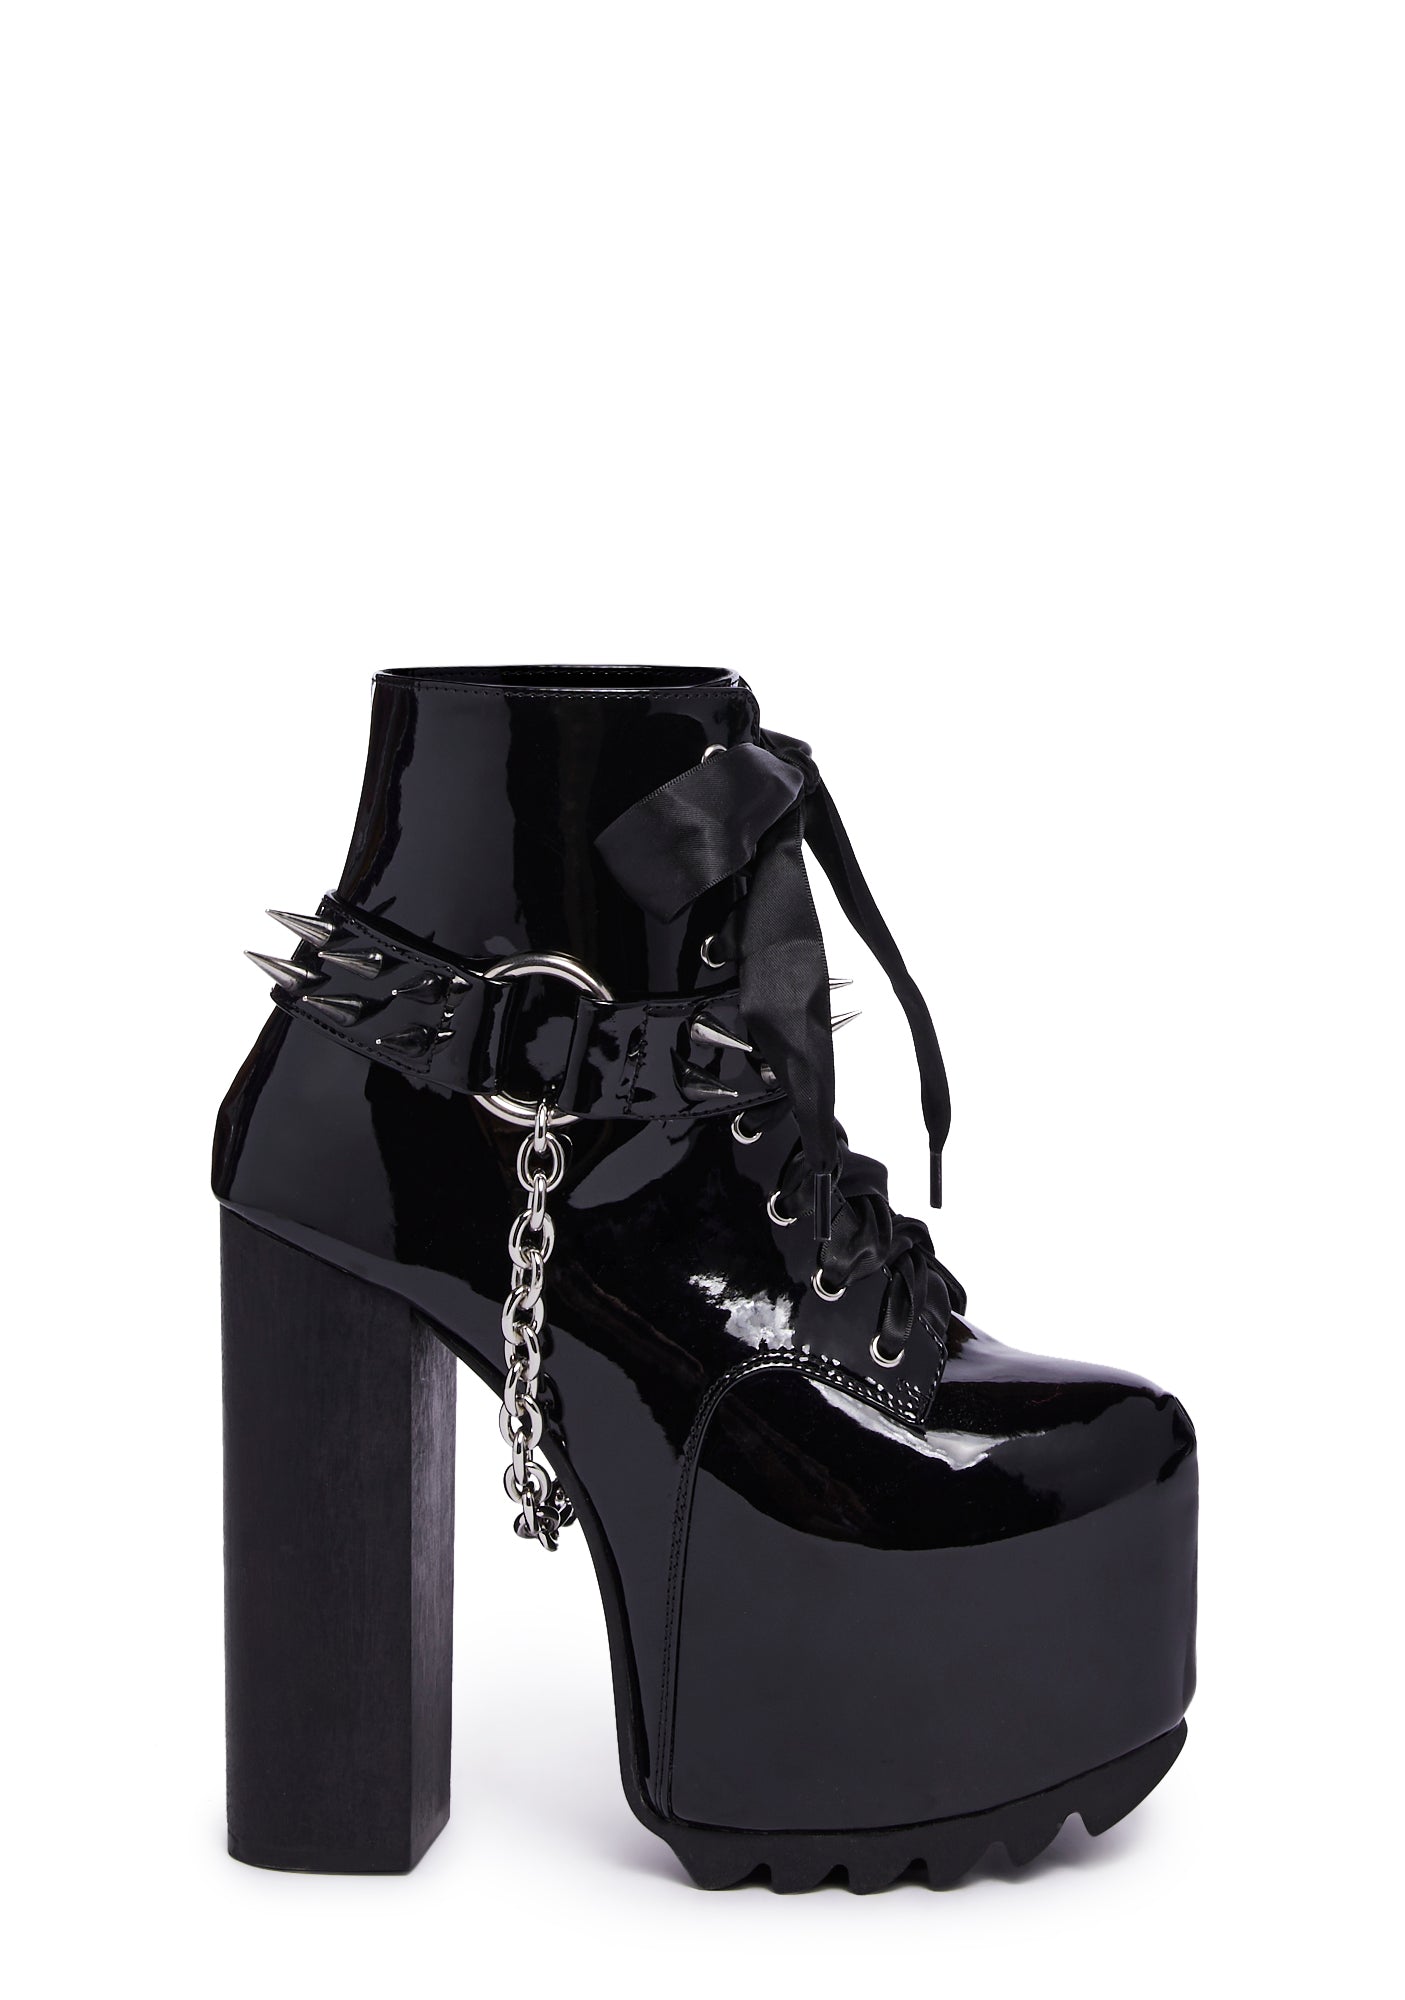 Widow Patent Faux Leather Platform Boots With Spiked Straps - Black